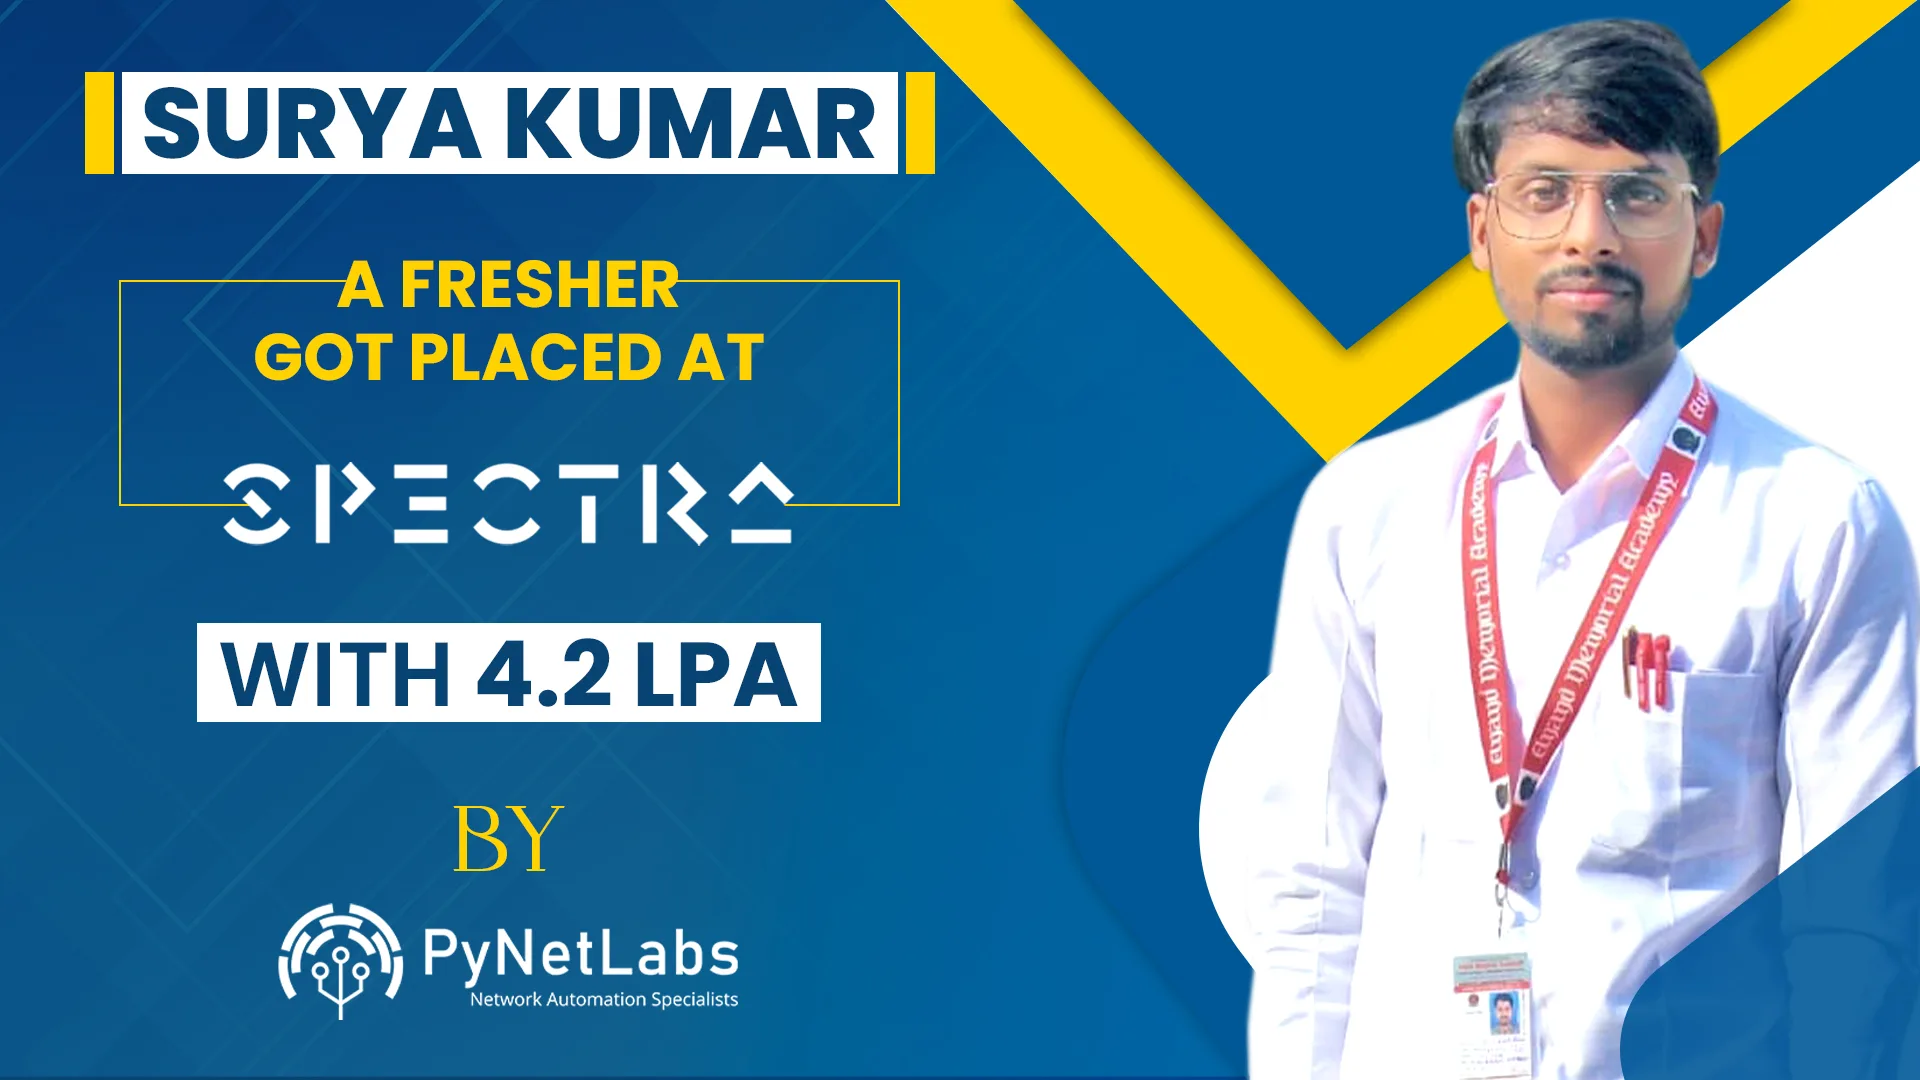 Surya Kumar, a fresher. got placed at Spectra with 4.2 LPA by PyNet Labs